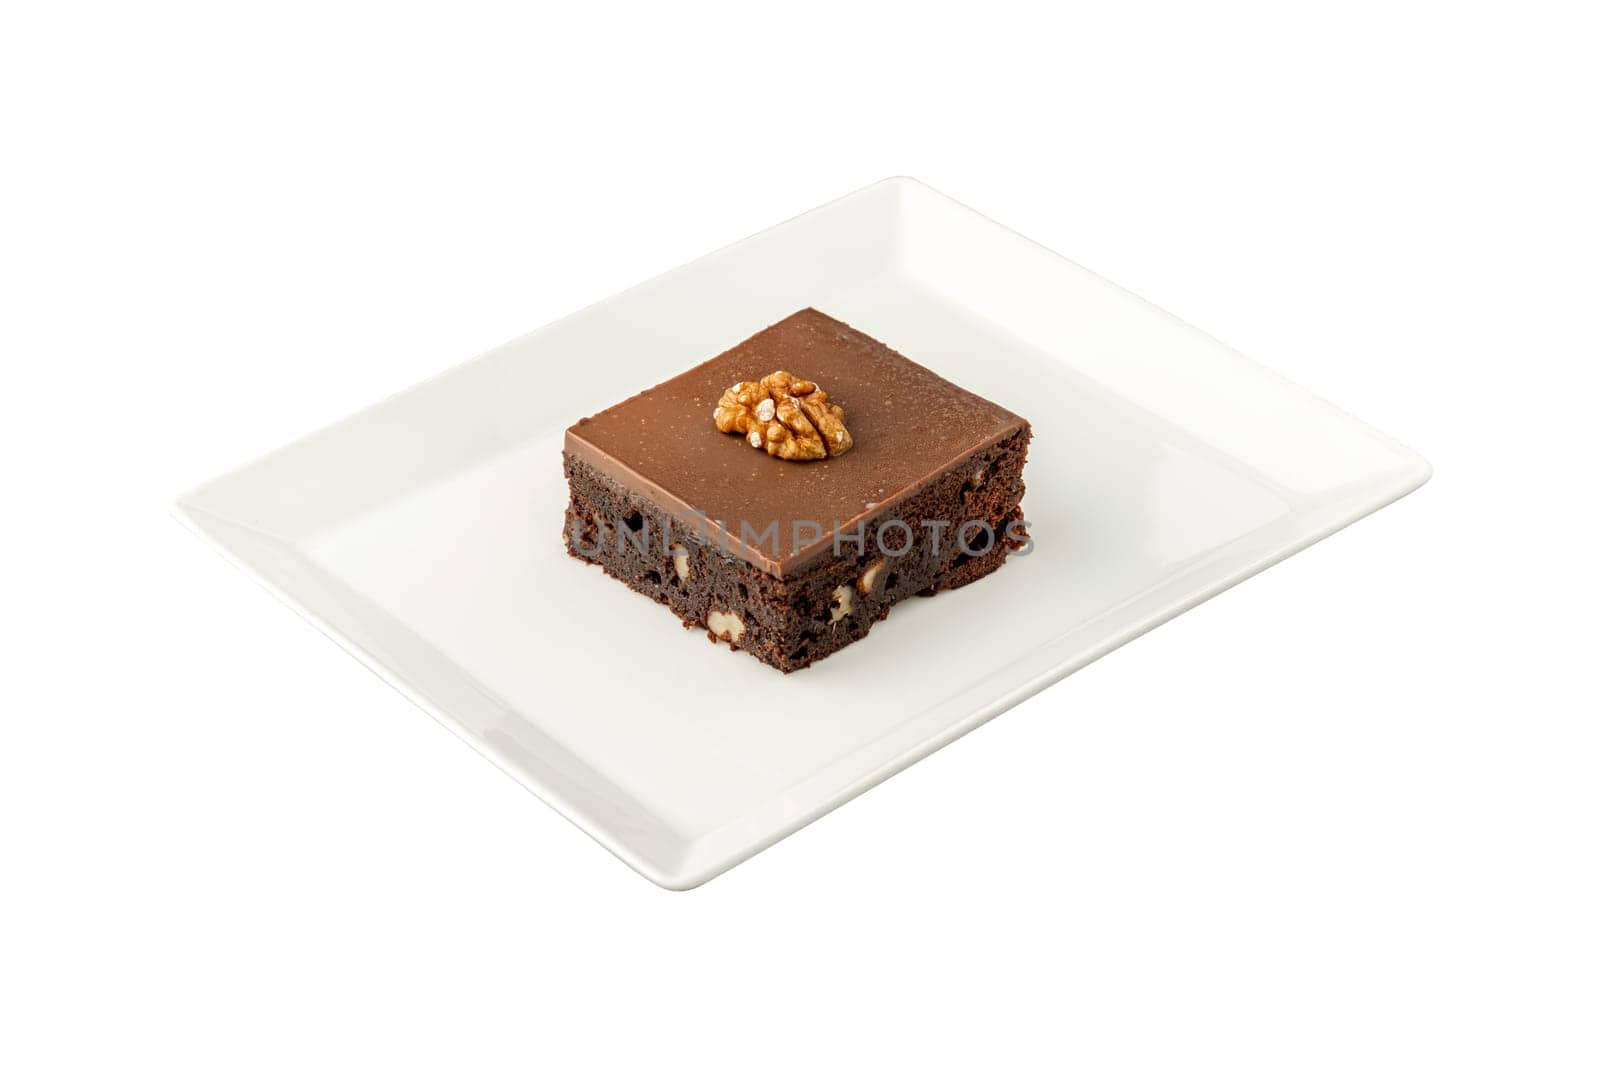 Walnut and dark chocolate brownie on a white porcelain plate on white background